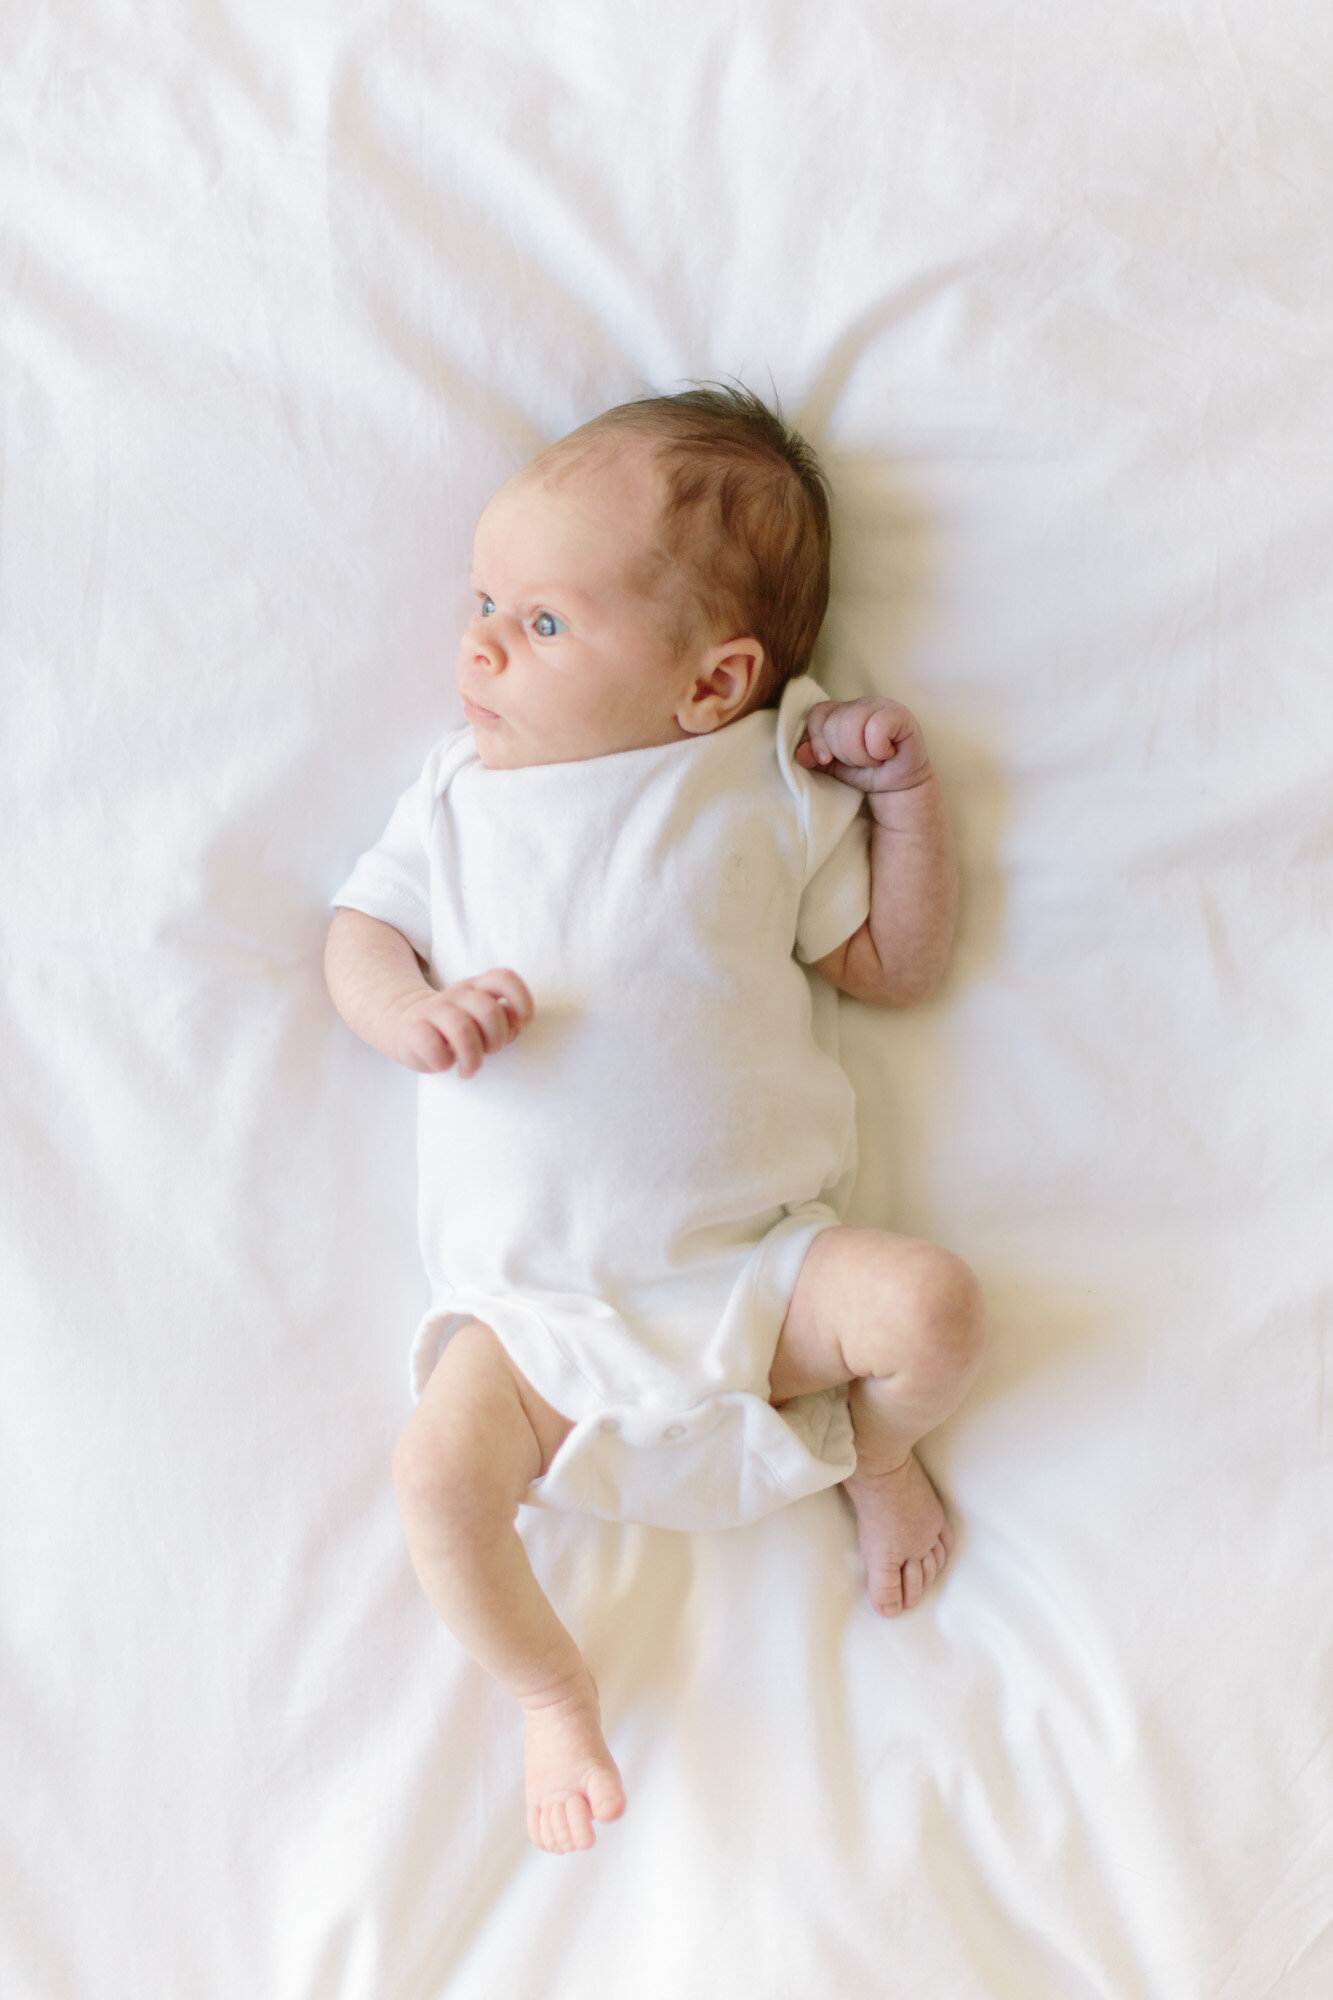 New York newborn Photographer, Jacqueline Clair Photography features their latest newborn session in Hoboken